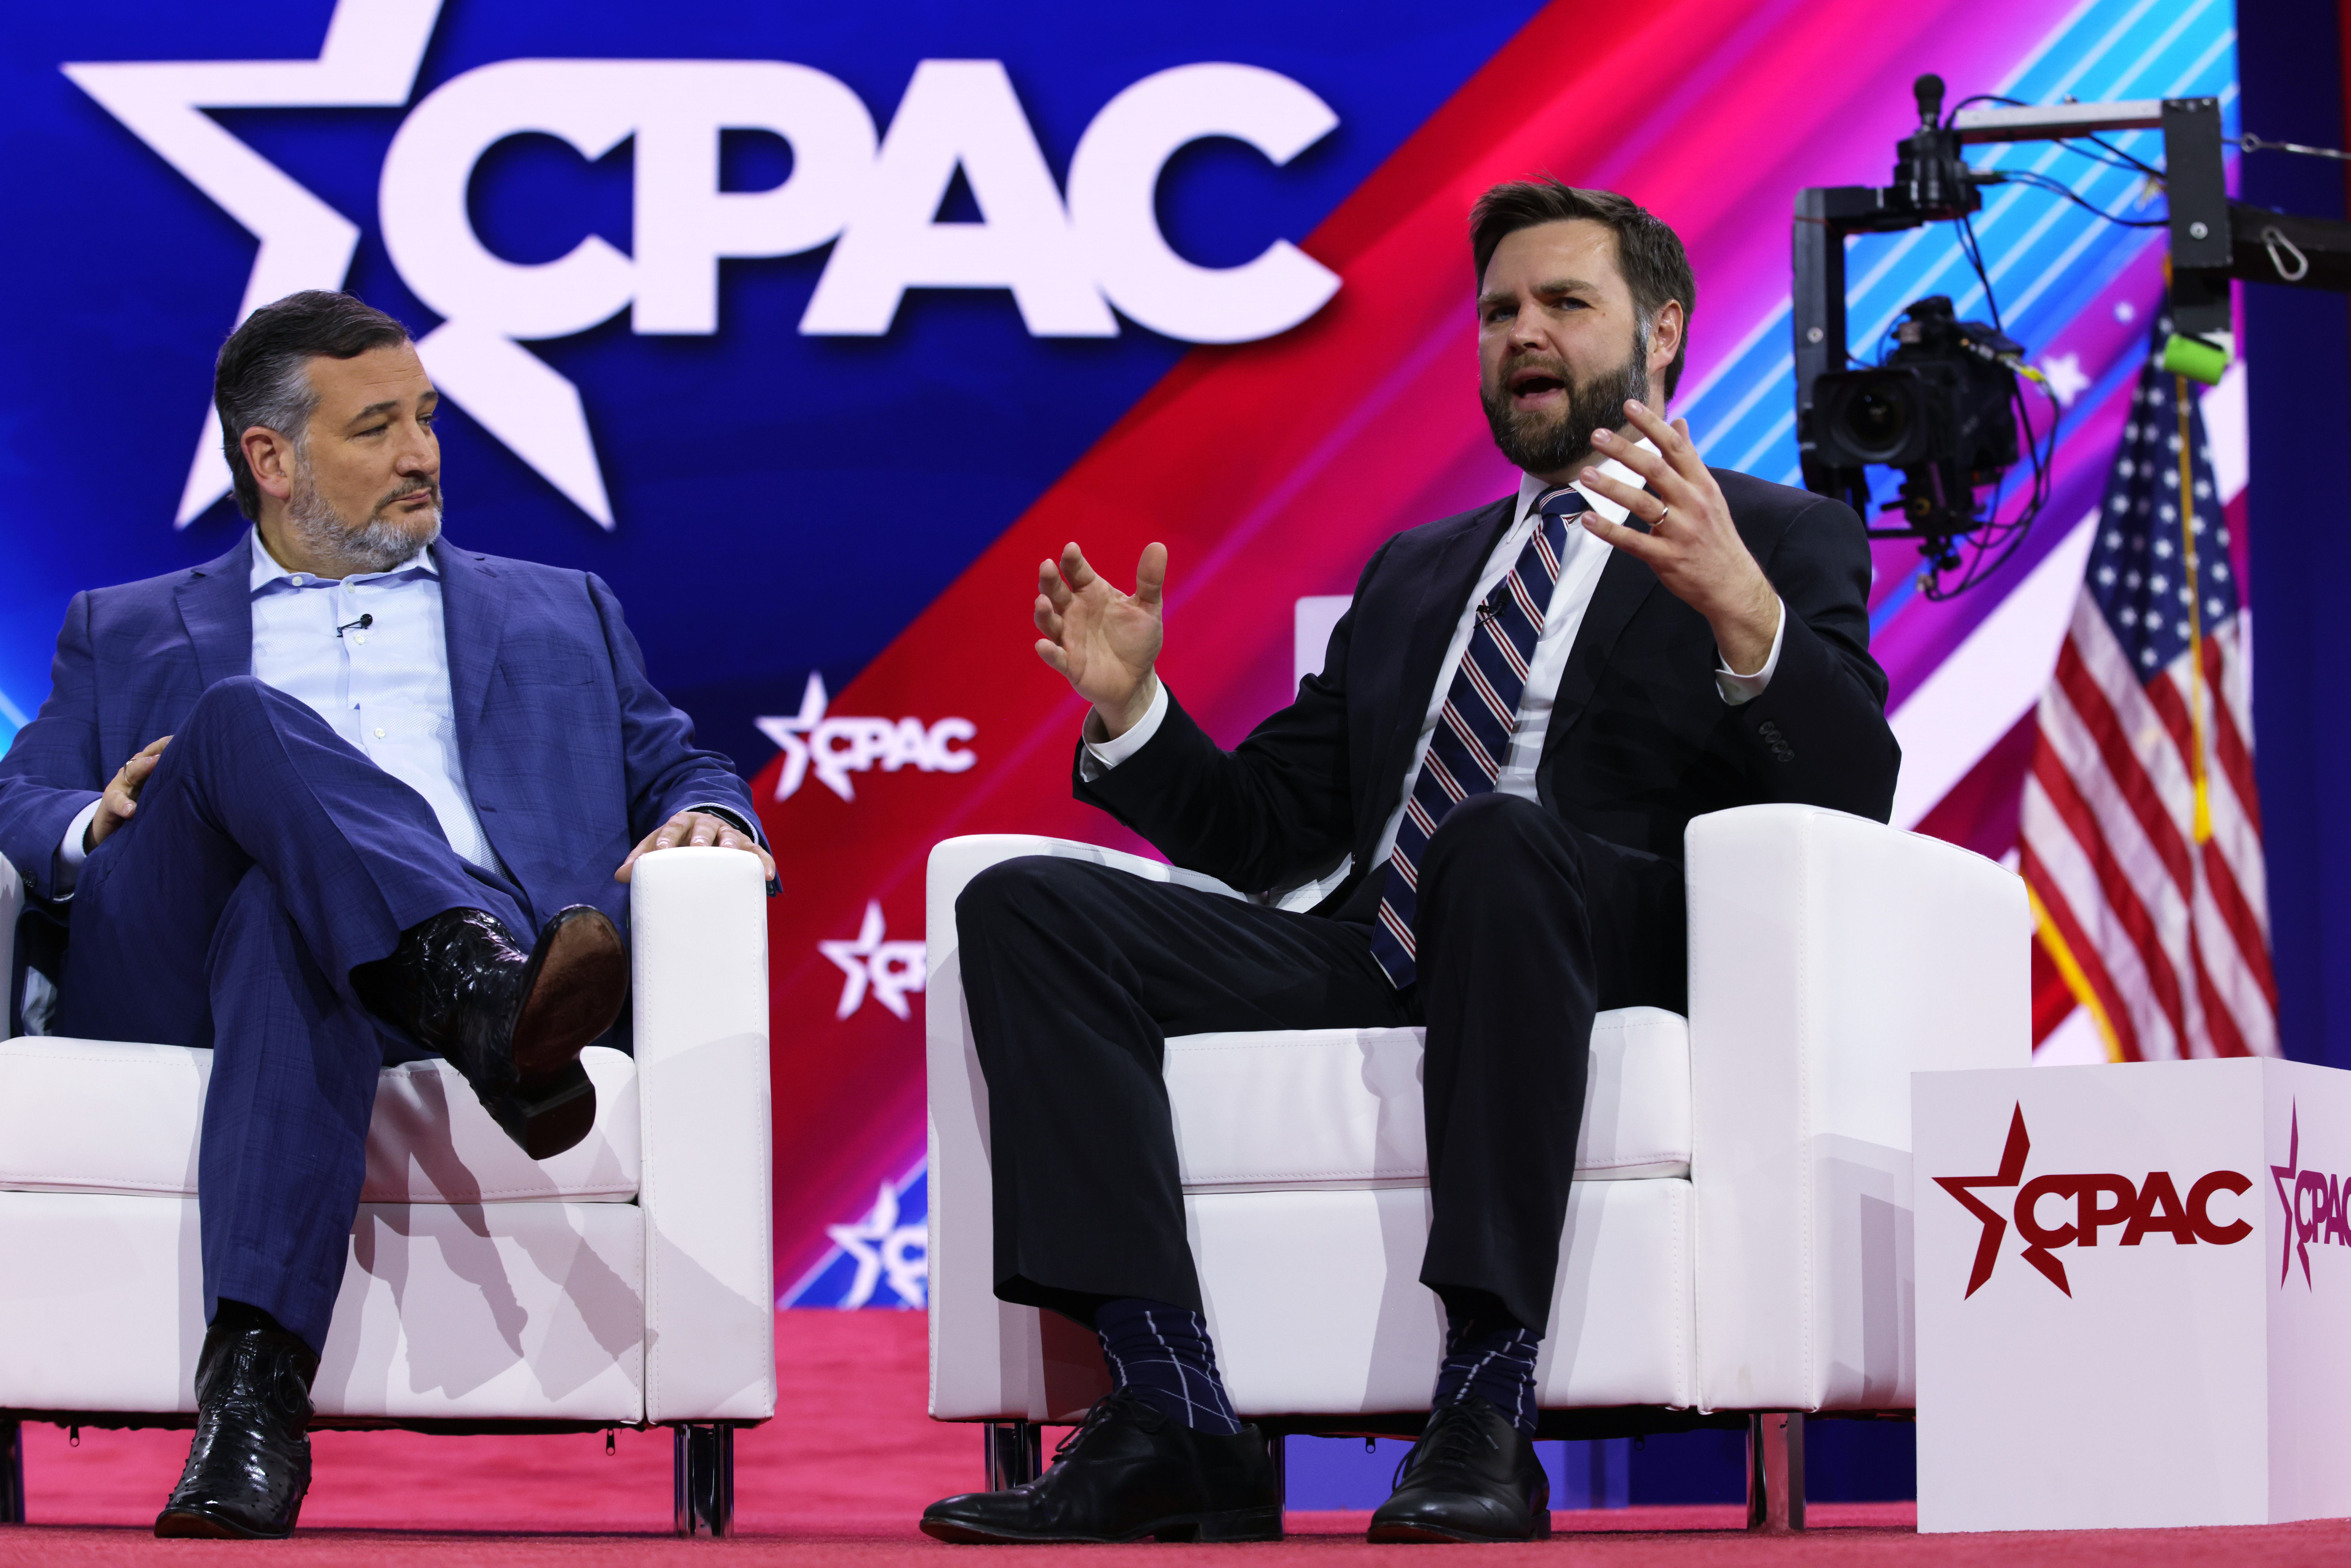 U.S. Sen. J.D. Vance (R-OH) (R) speaks as Sen. Ted Cruz (R-TX) (L) listens during the annual Conservative Political Action Conference (CPAC) at Gaylord National Resort & Convention Center on March 2, 2023 in National Harbor, Maryland. The annual conservative conference kicks off today with former President Donald Trump addressing the event on Saturday. (Photo by Alex Wong/Getty Images)